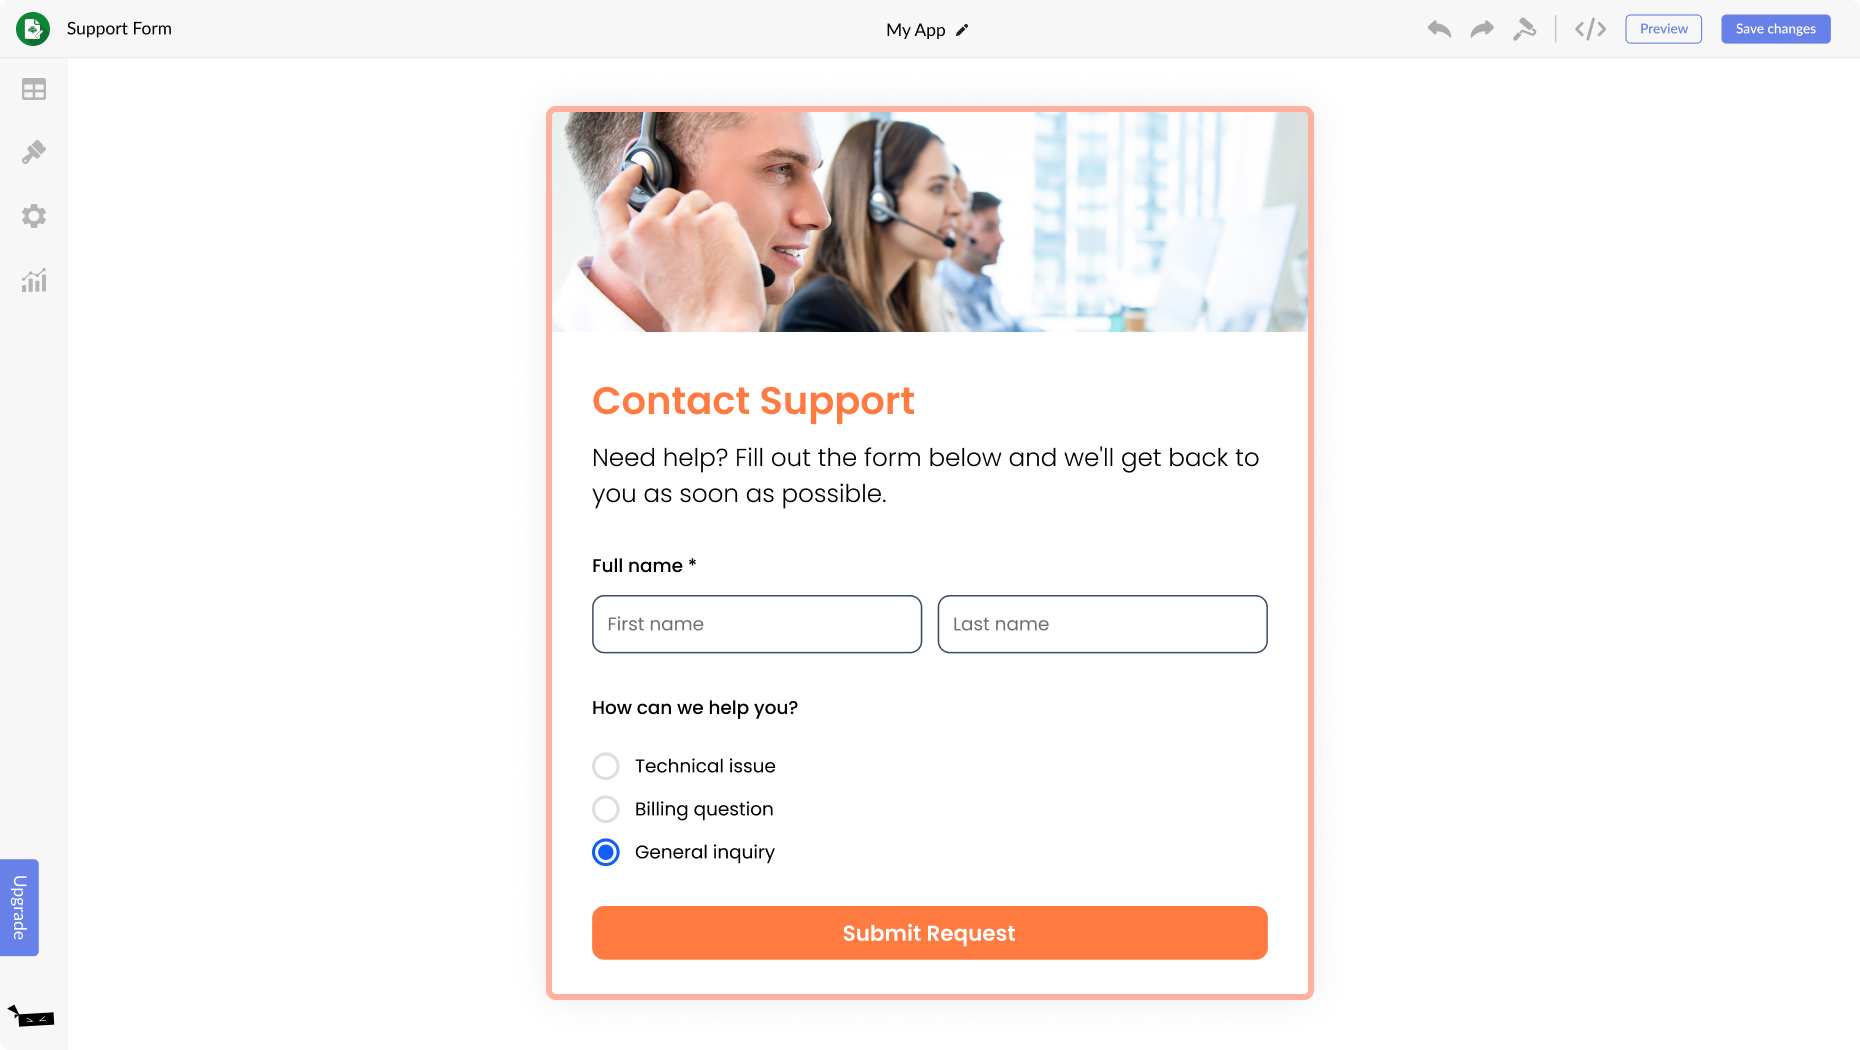 Support Form for Joomla